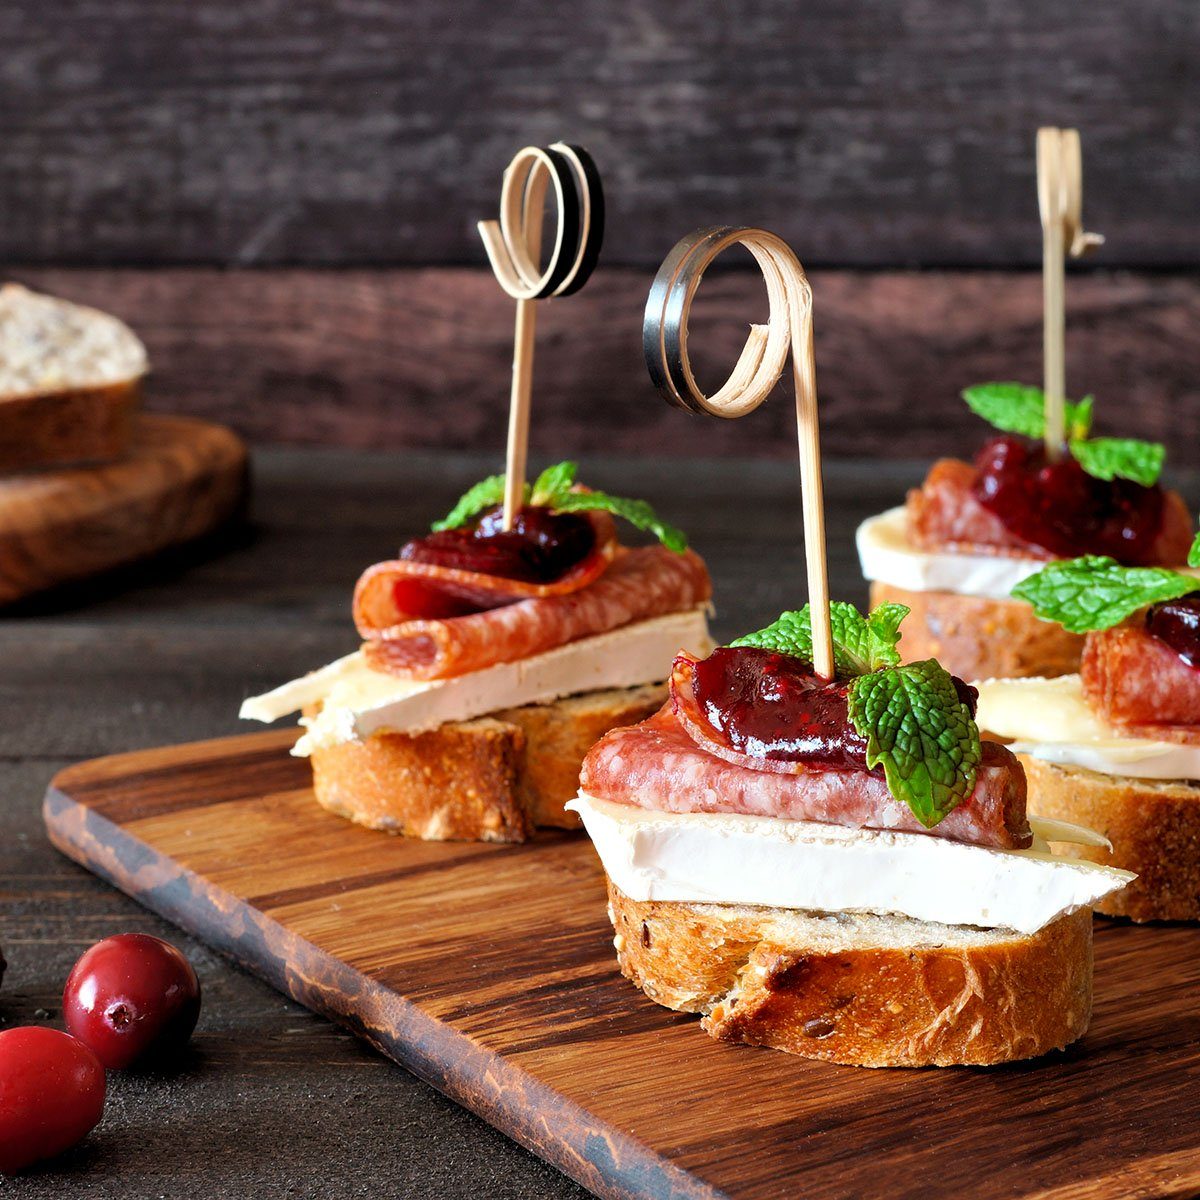 Holiday crostini skewers with cranberry sauce, brie, salami, and mint on a wooden server